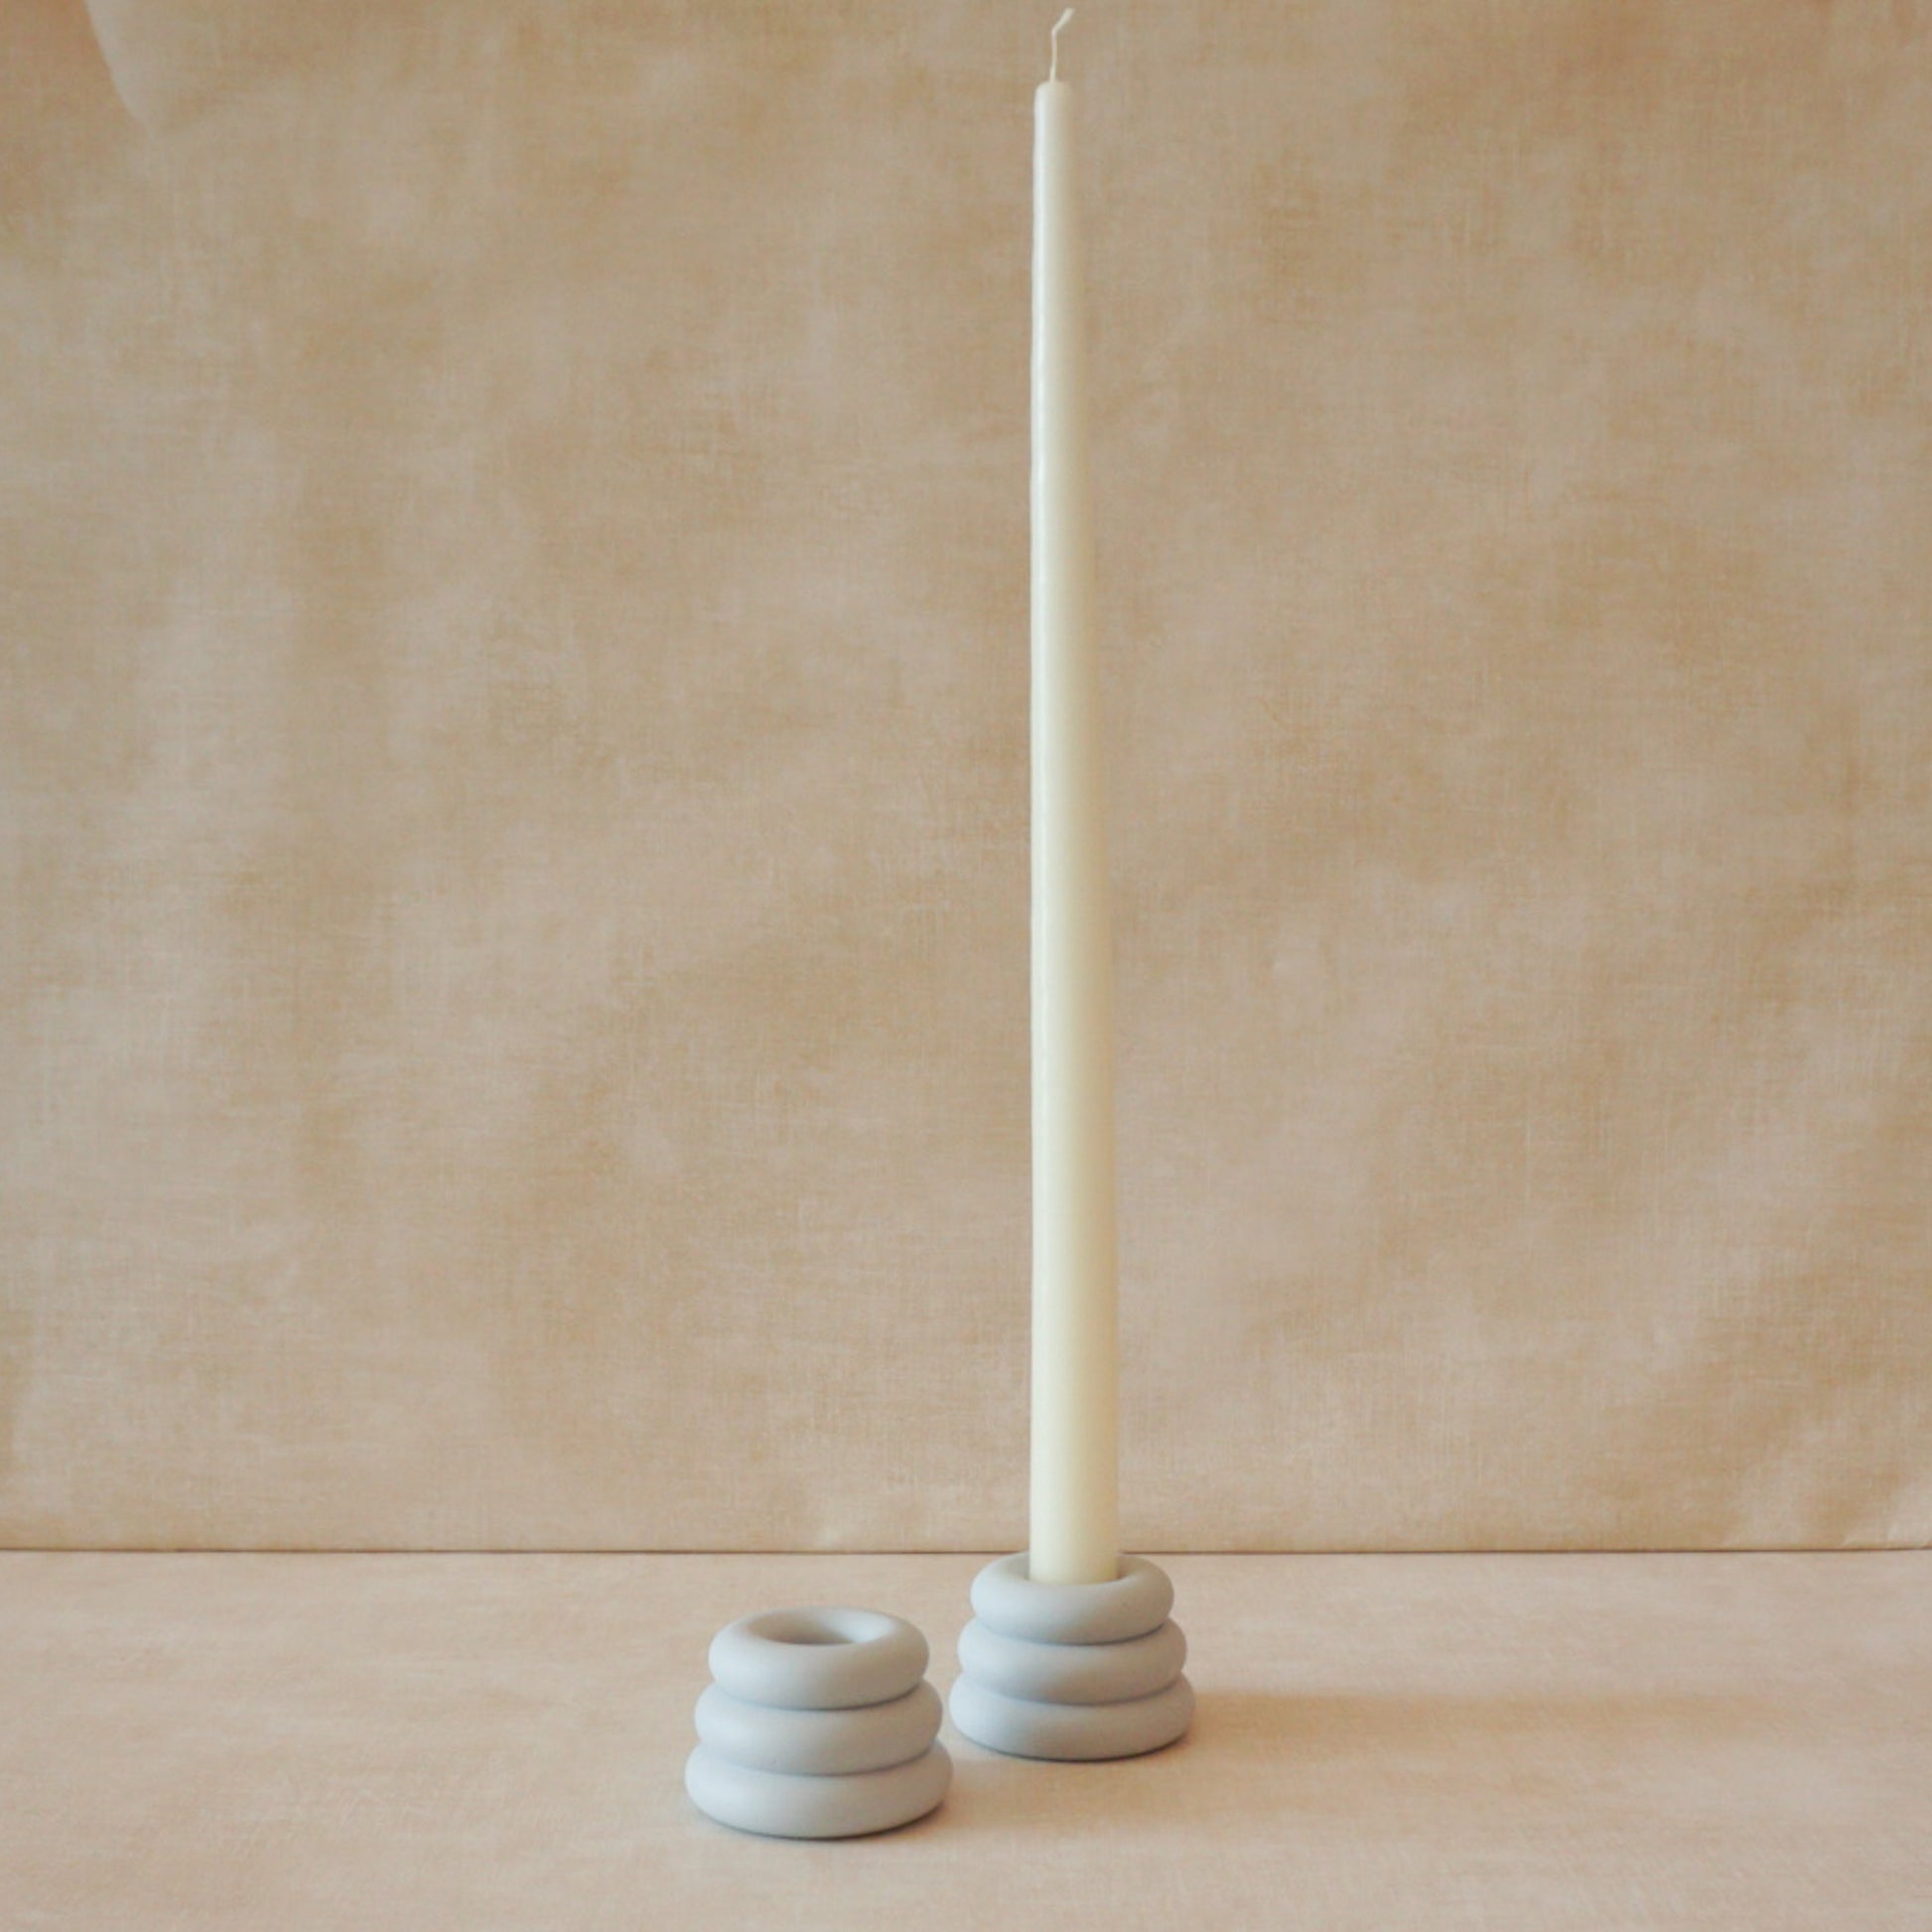 Sleek and contemporary candle holder with circular rings